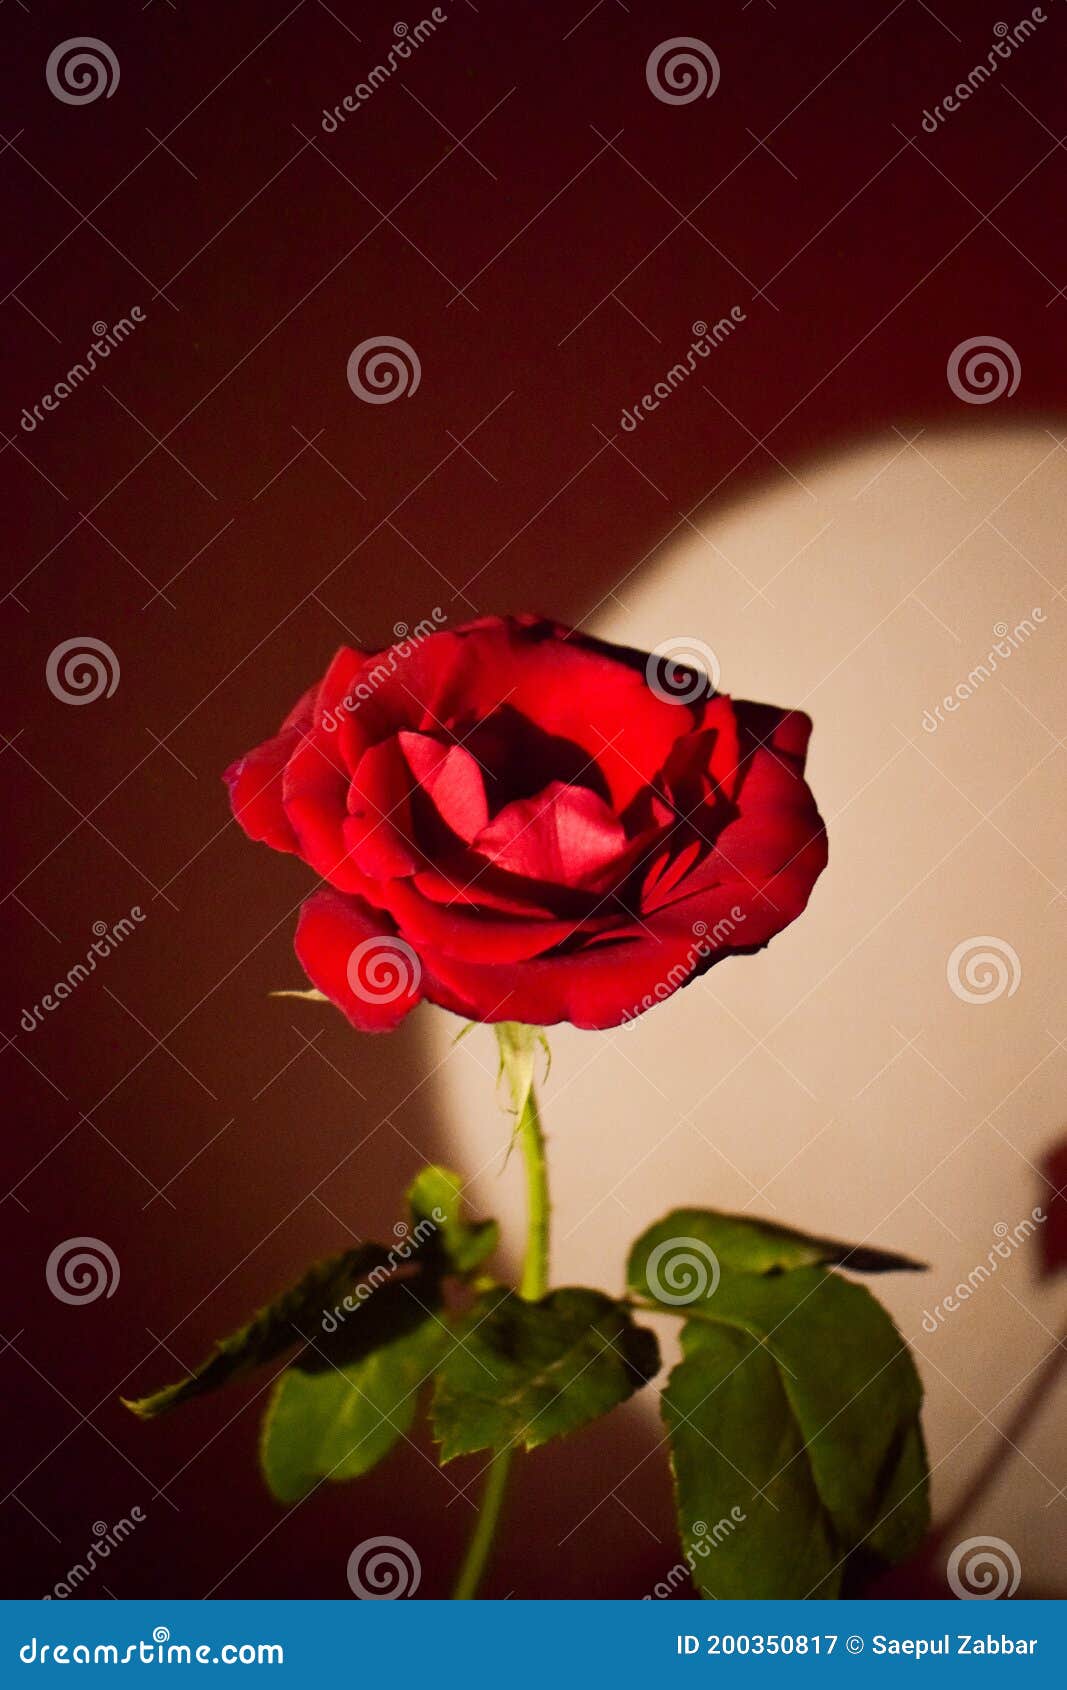 A Beautiful Red Rose with Dramatic Lighting Stock Image - Image of ...